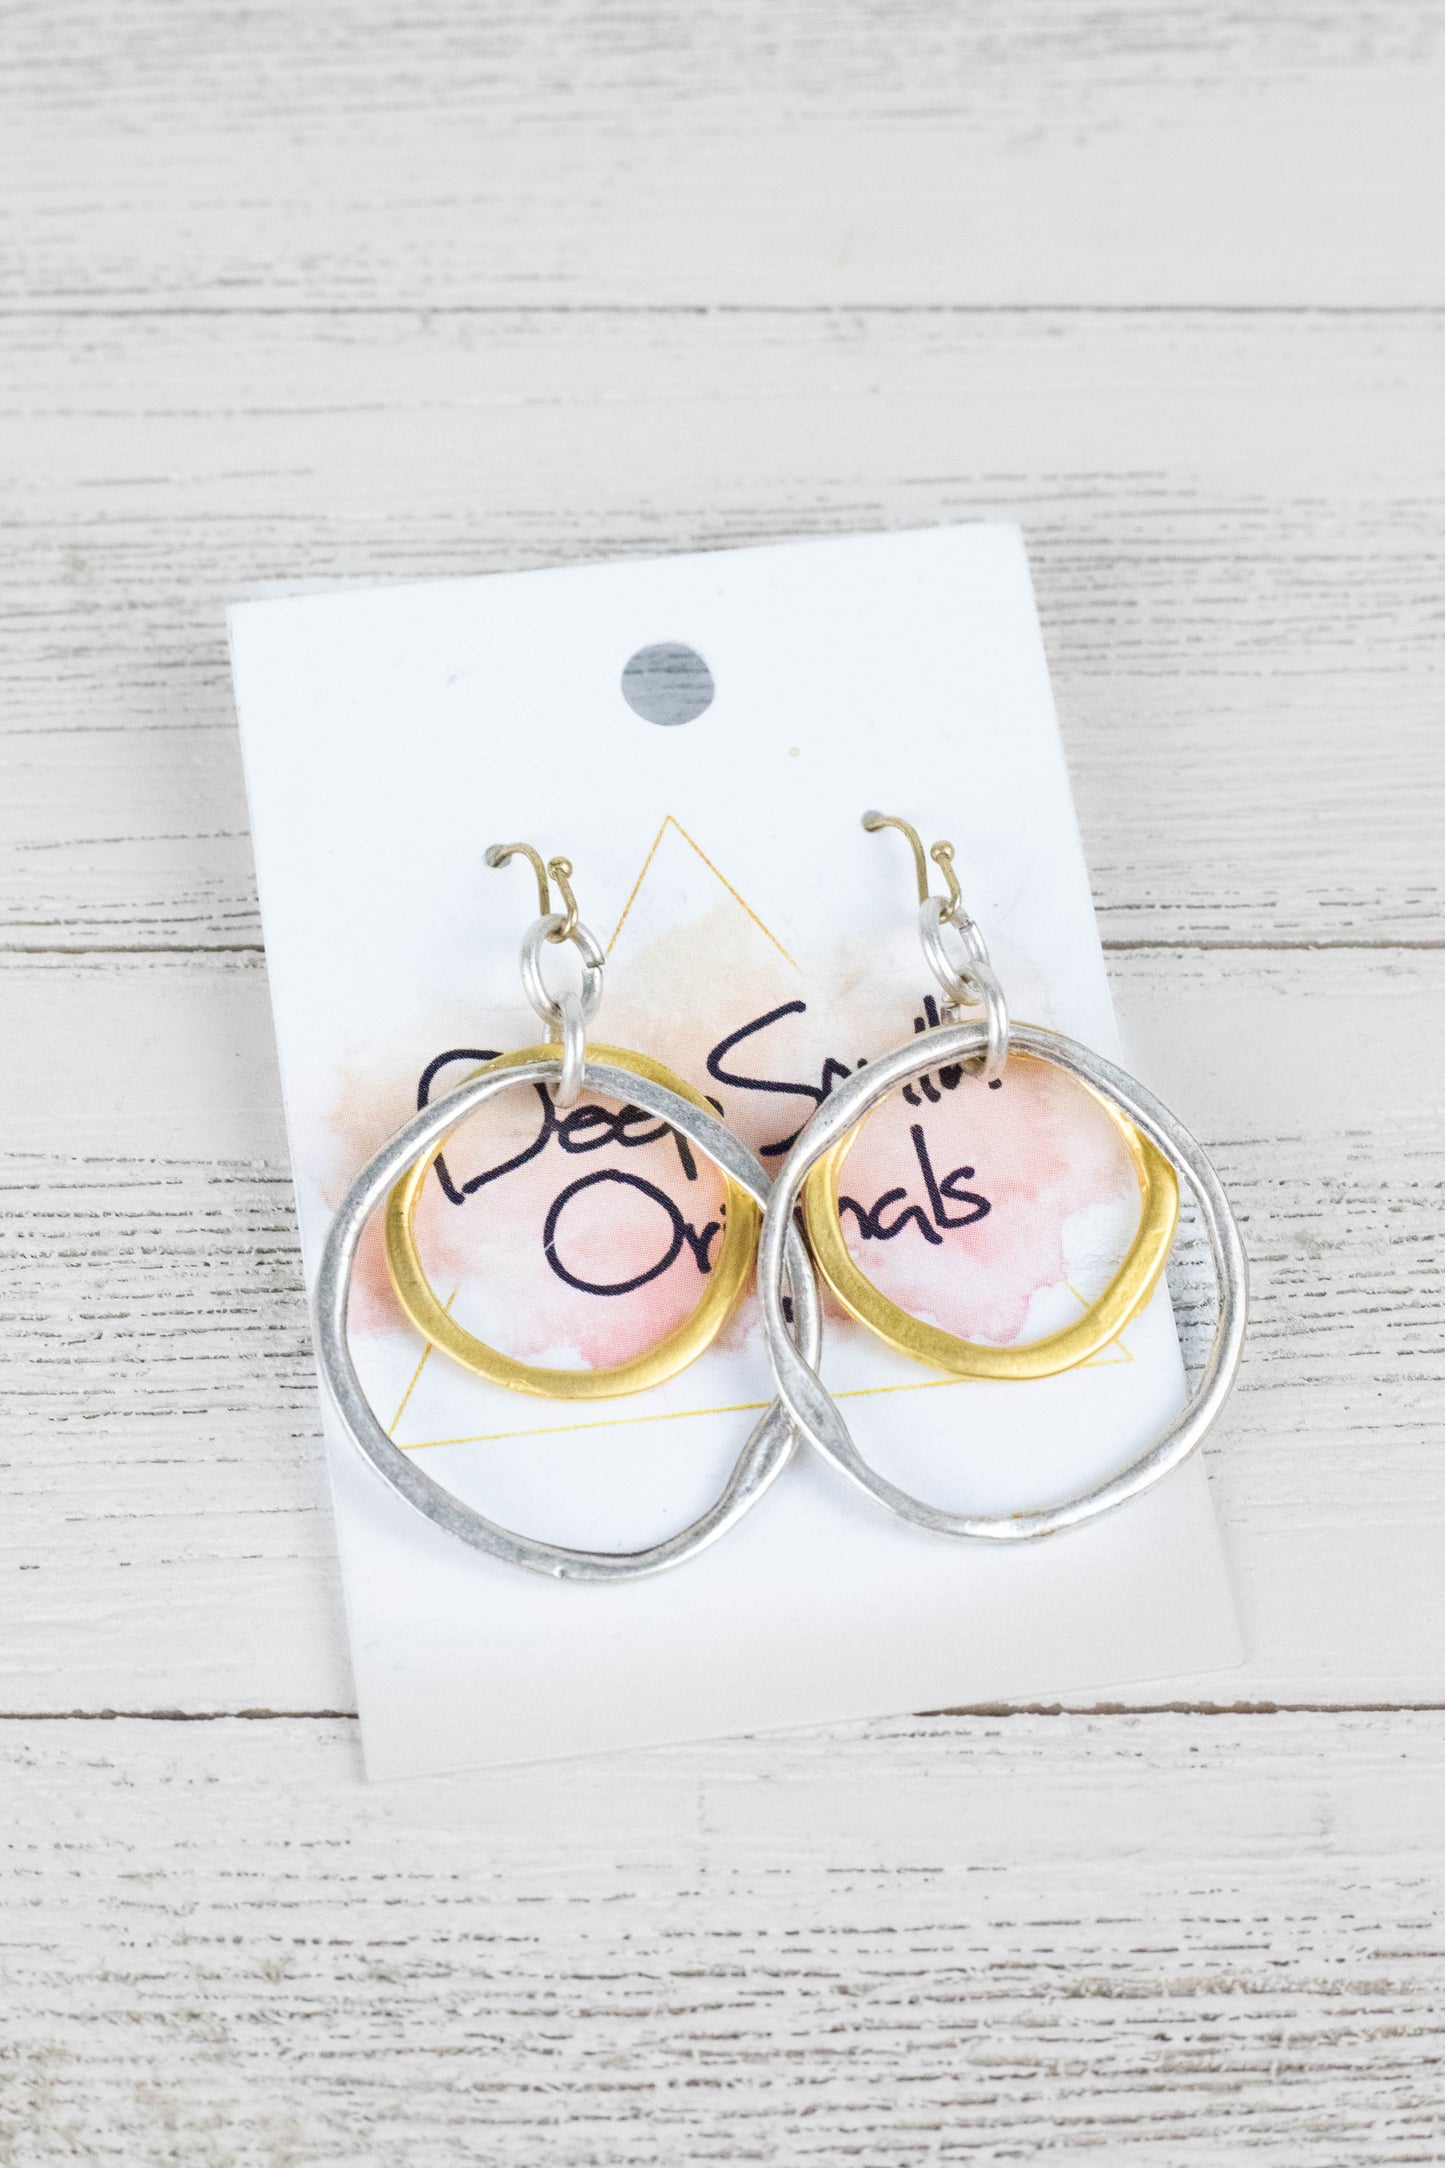 Double Circle Earrings - Small Gold Circle inside a Larger Silver Circle from Deep South Originals